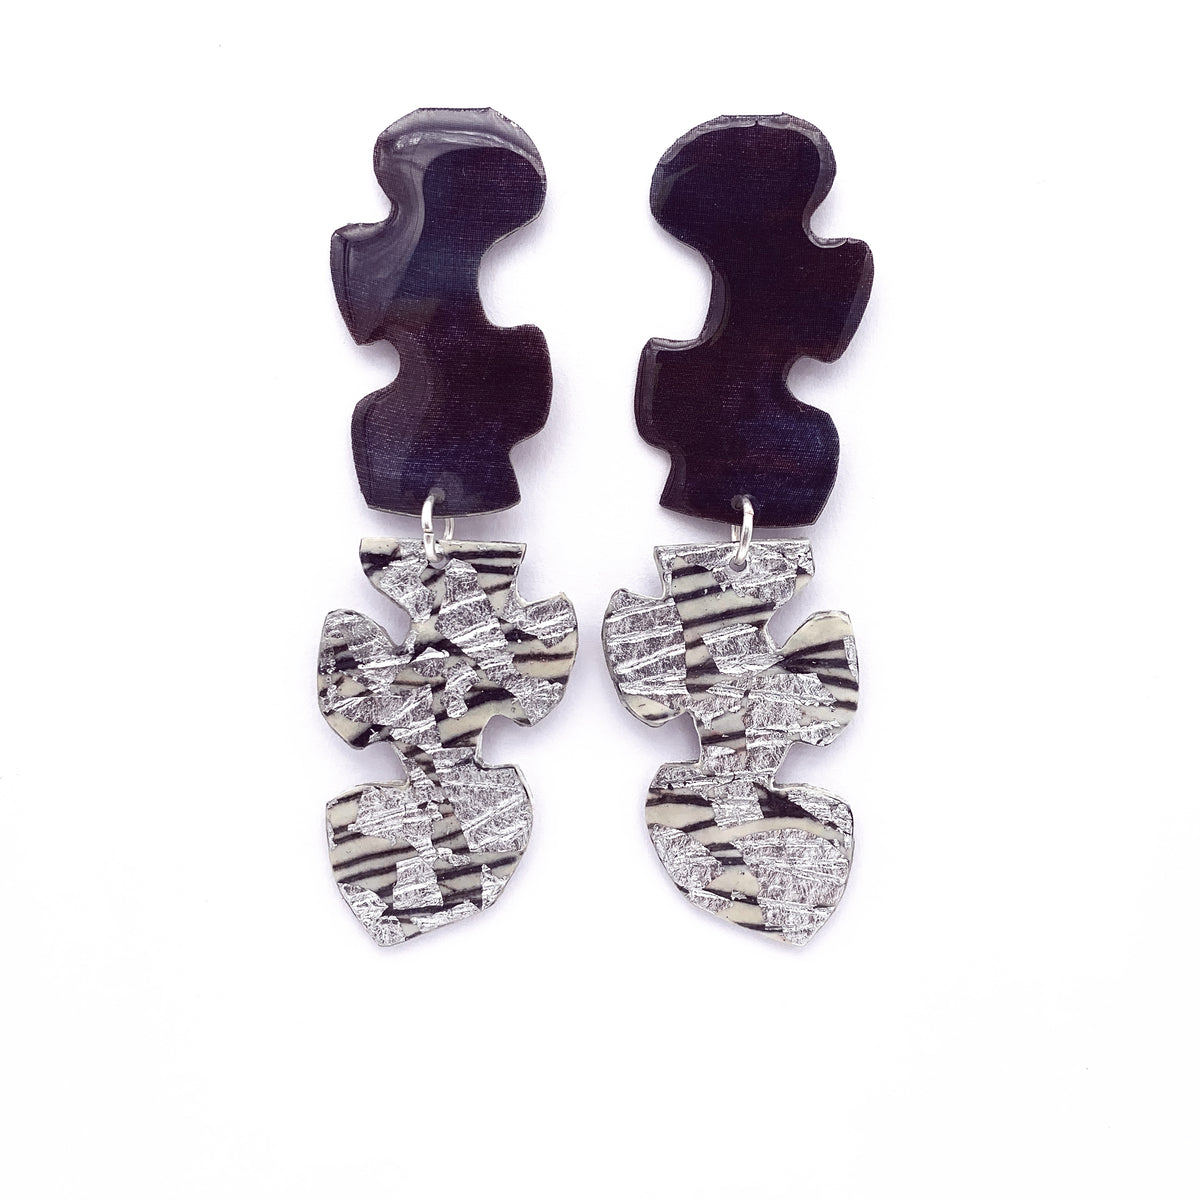 Puzzle post drop earrings in grey/silver sgraffito and midnight silk